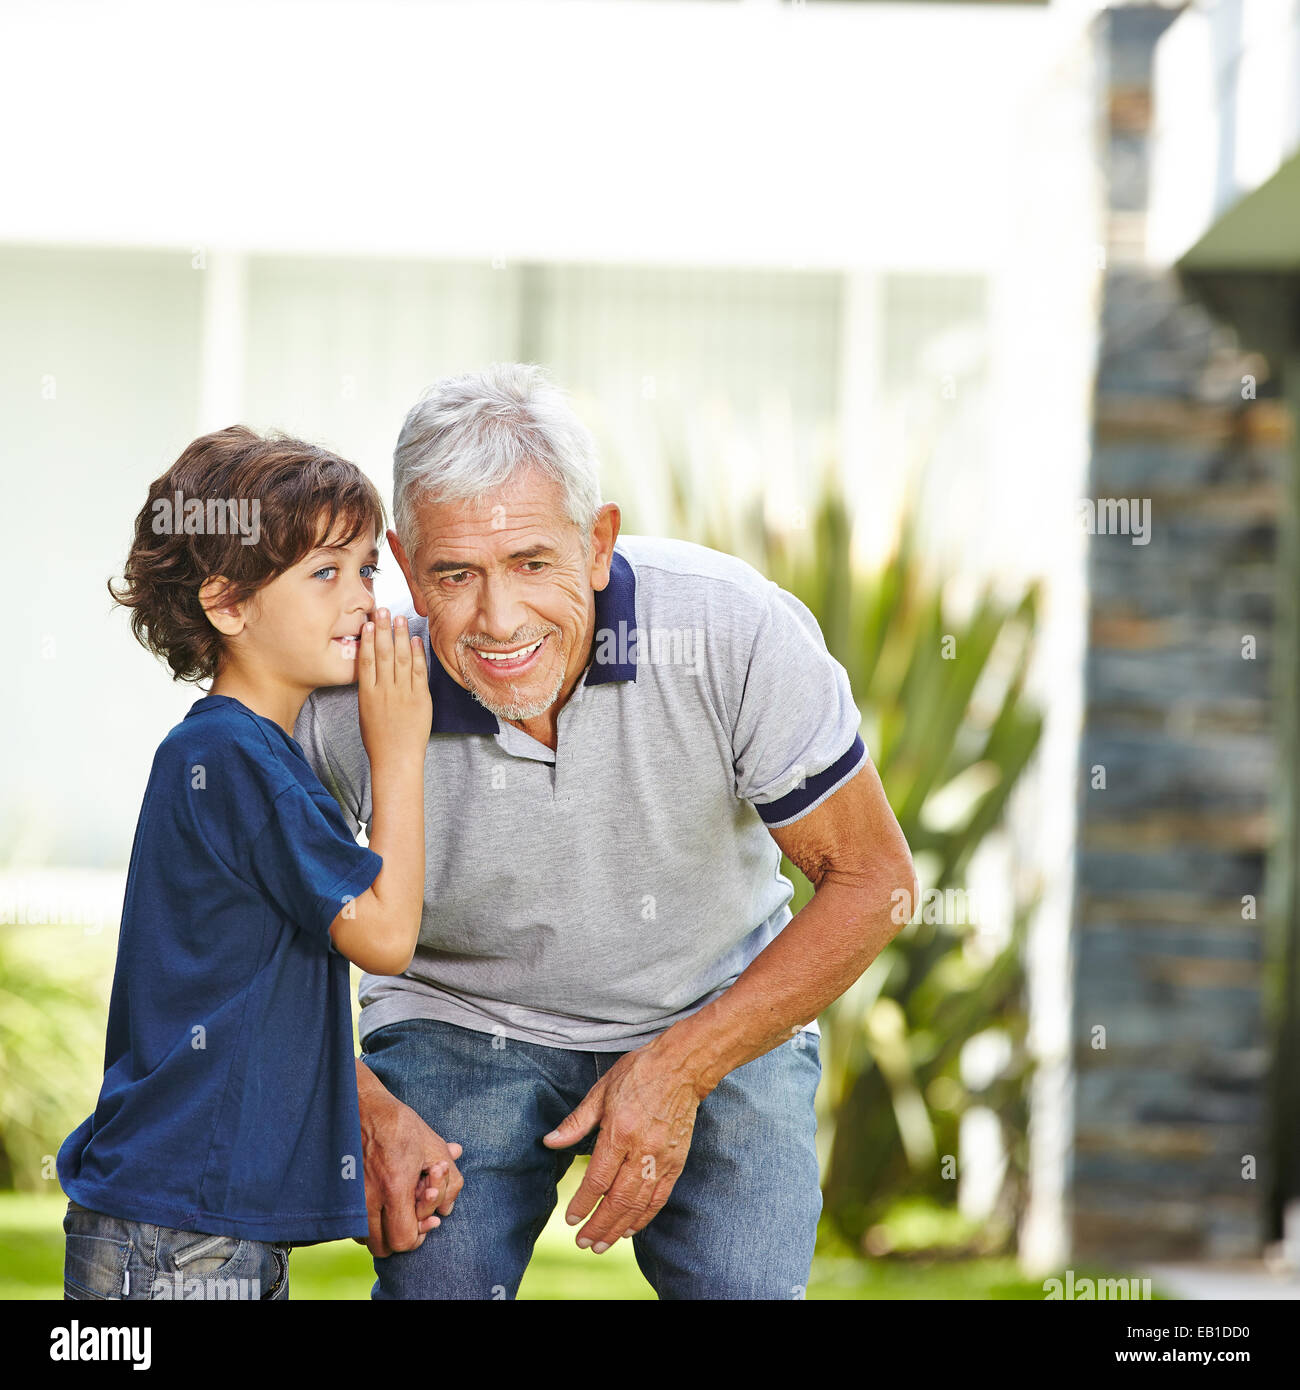 Grandson whispering a secret in the ear of his grandfather outdoors Stock Photo